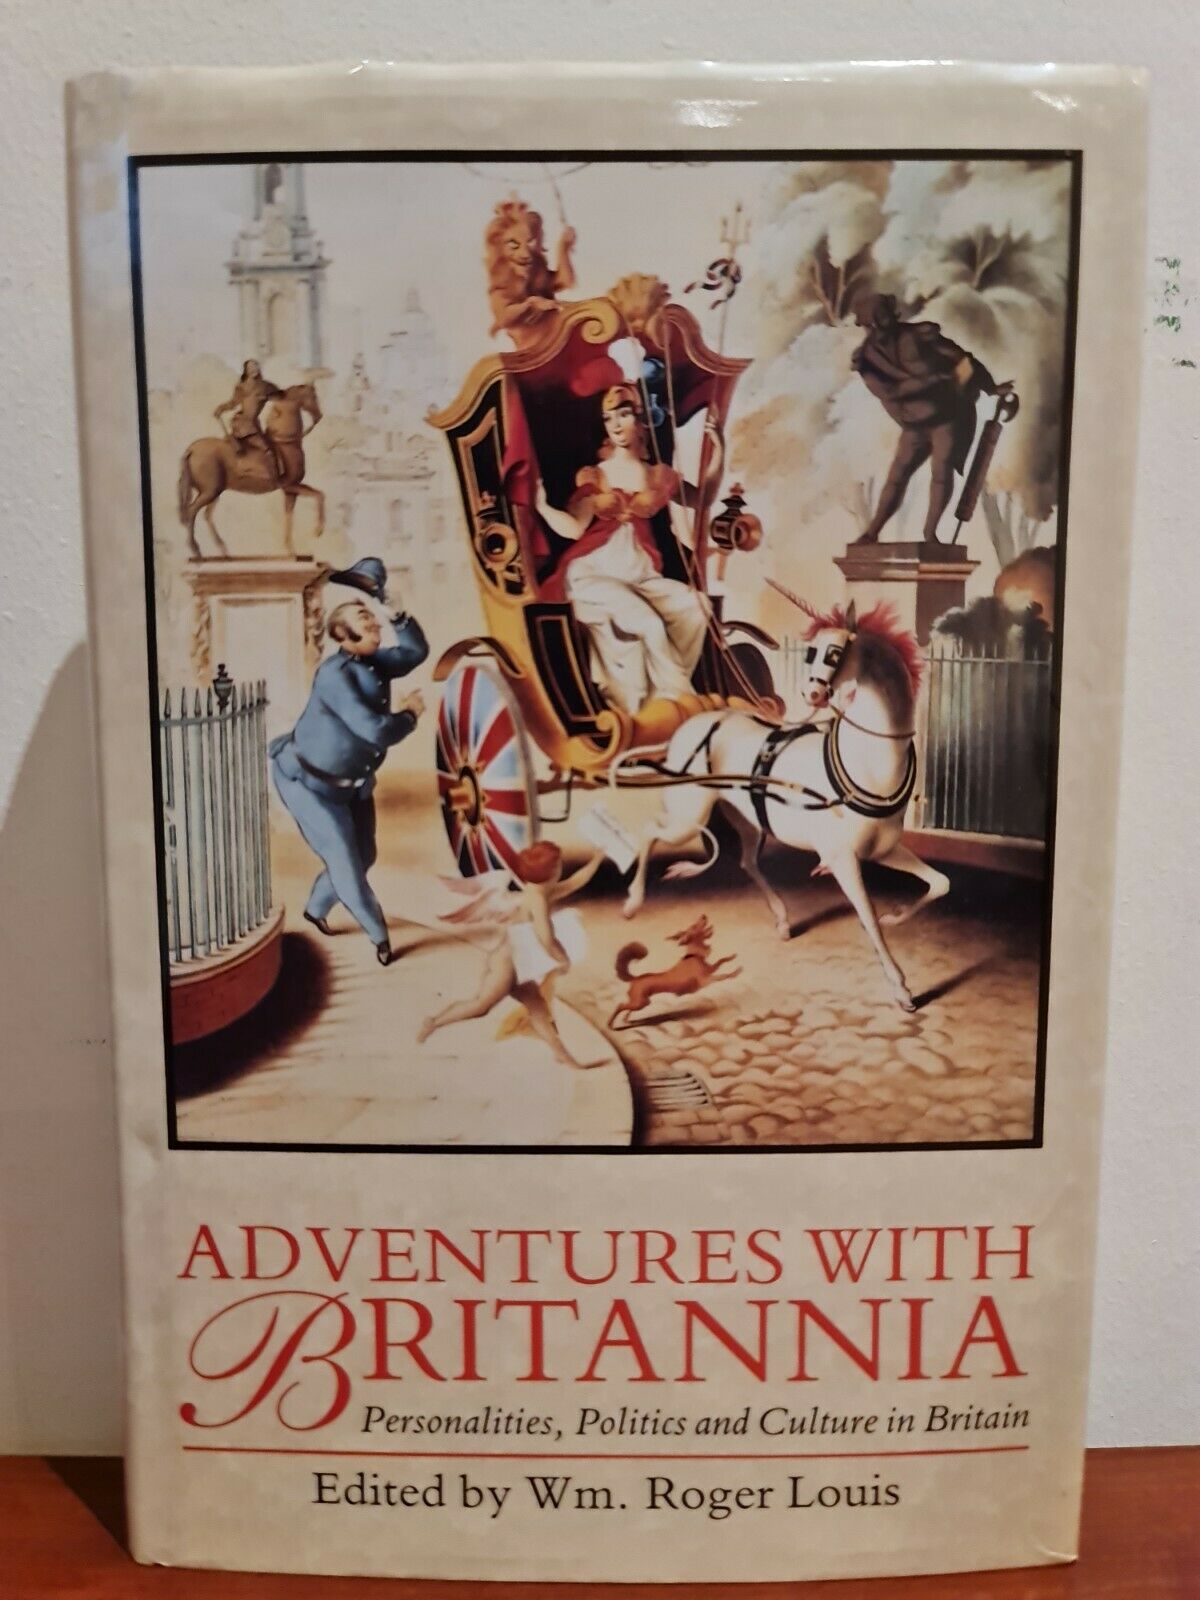 Adventures with Britannia by Roger Louis